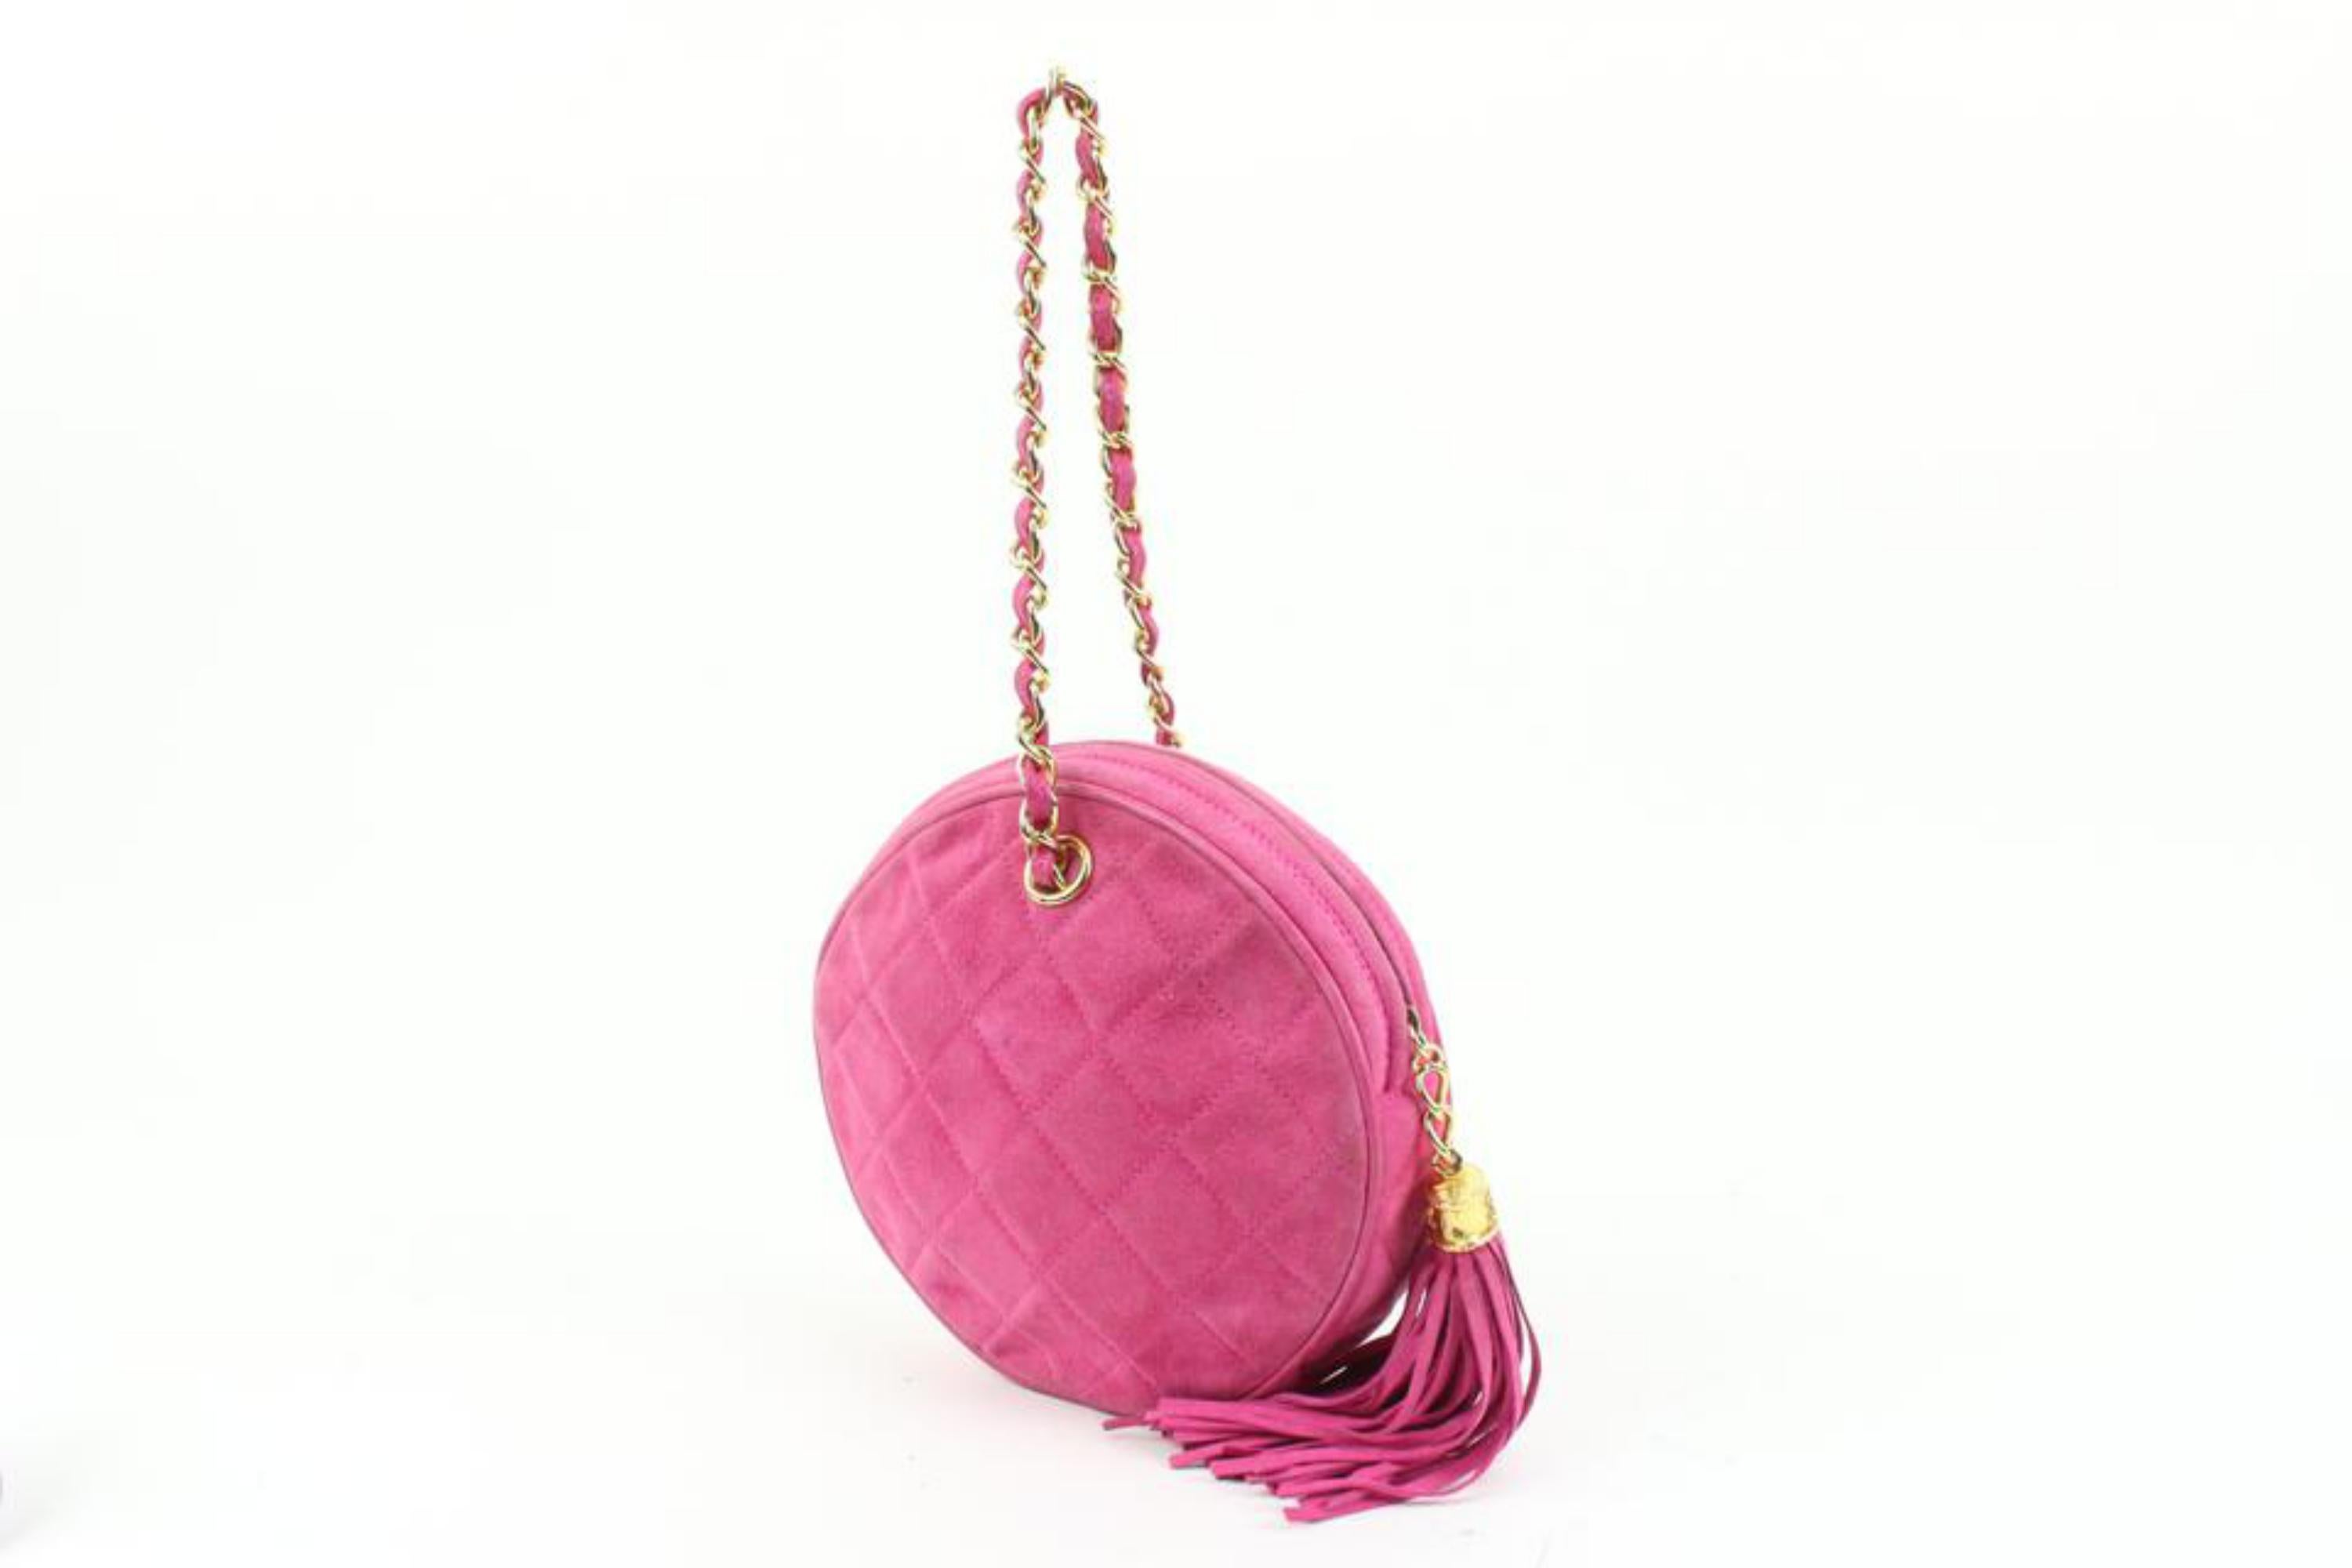 Chanel Hot Pink Quilted Suede Fringe Tassel Round Clutch on Chain 88cz425s
Date Code/Serial Number: 0888891
Made In: Italy
Measurements: Length:  6.2